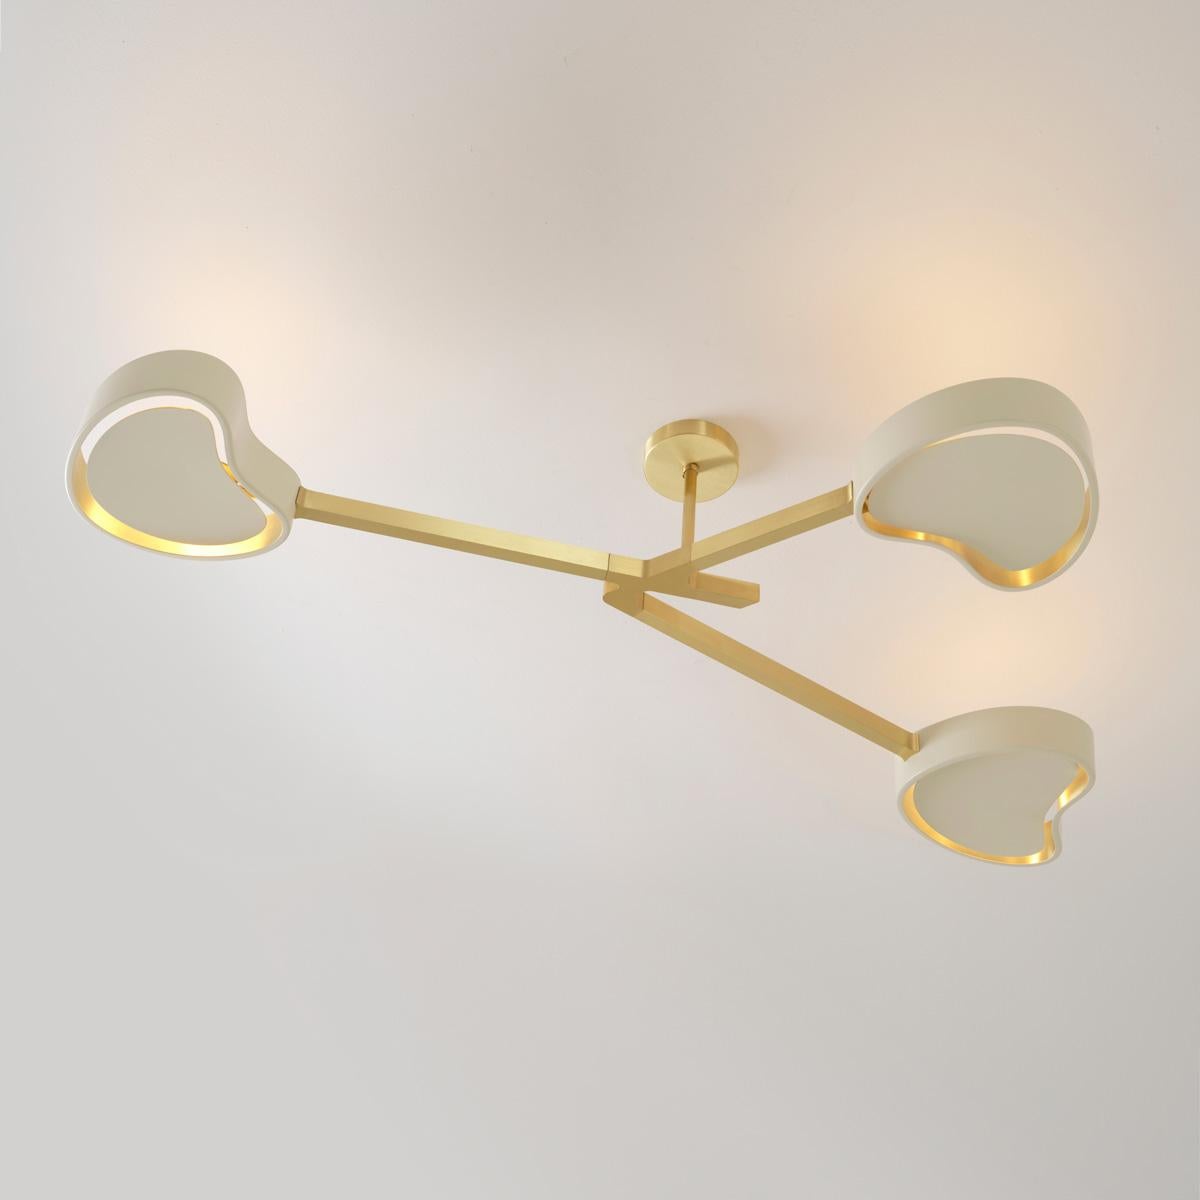 Modern Cuore N.3 Ceiling Light by Gaspare Asaro. Satin Brass and Sand White For Sale